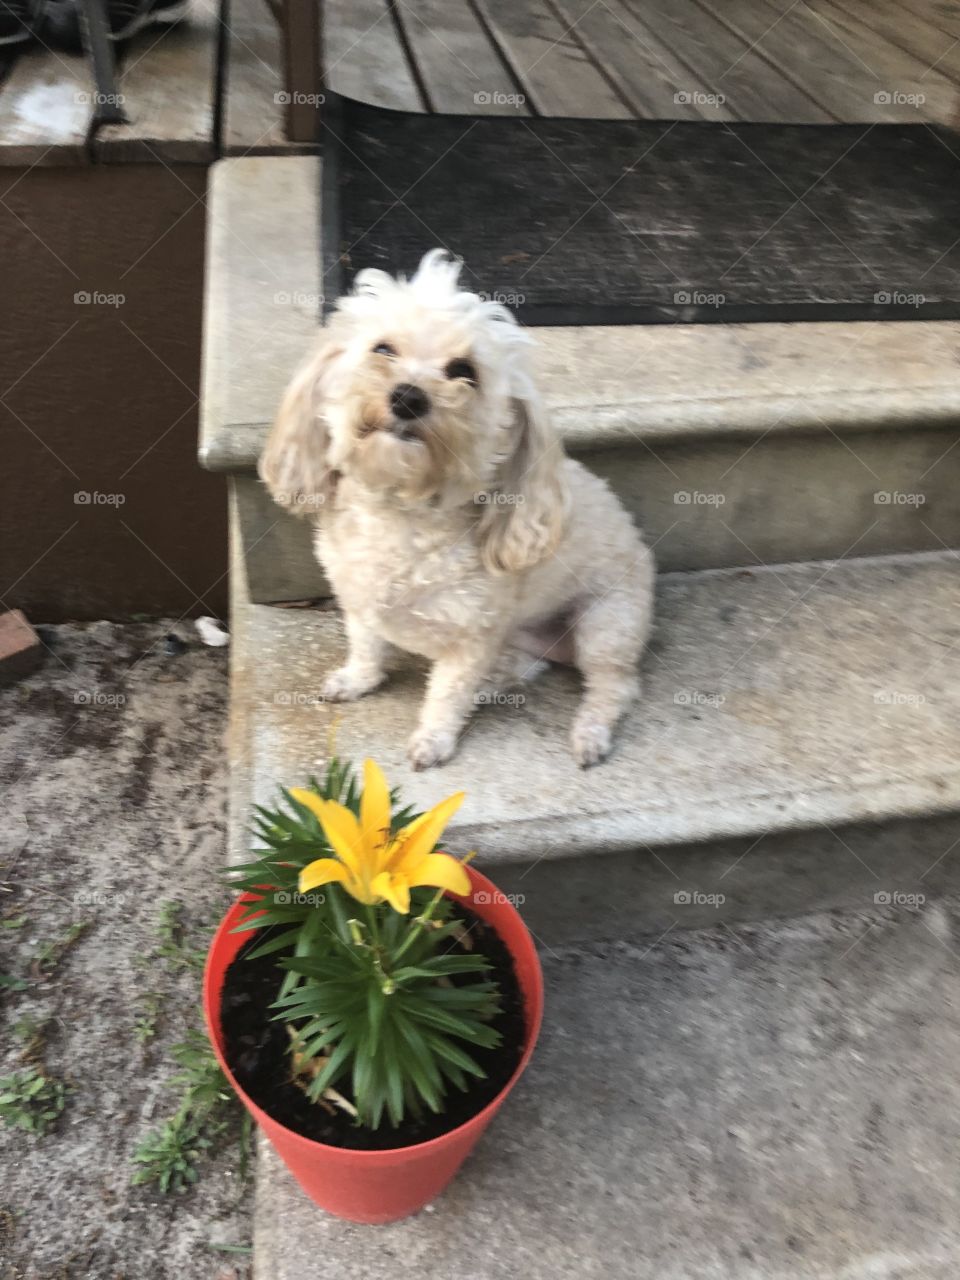 Sassy sitting by moms mew flowers she loves being outside. Happy lilttle pup best dog ever,,,,,